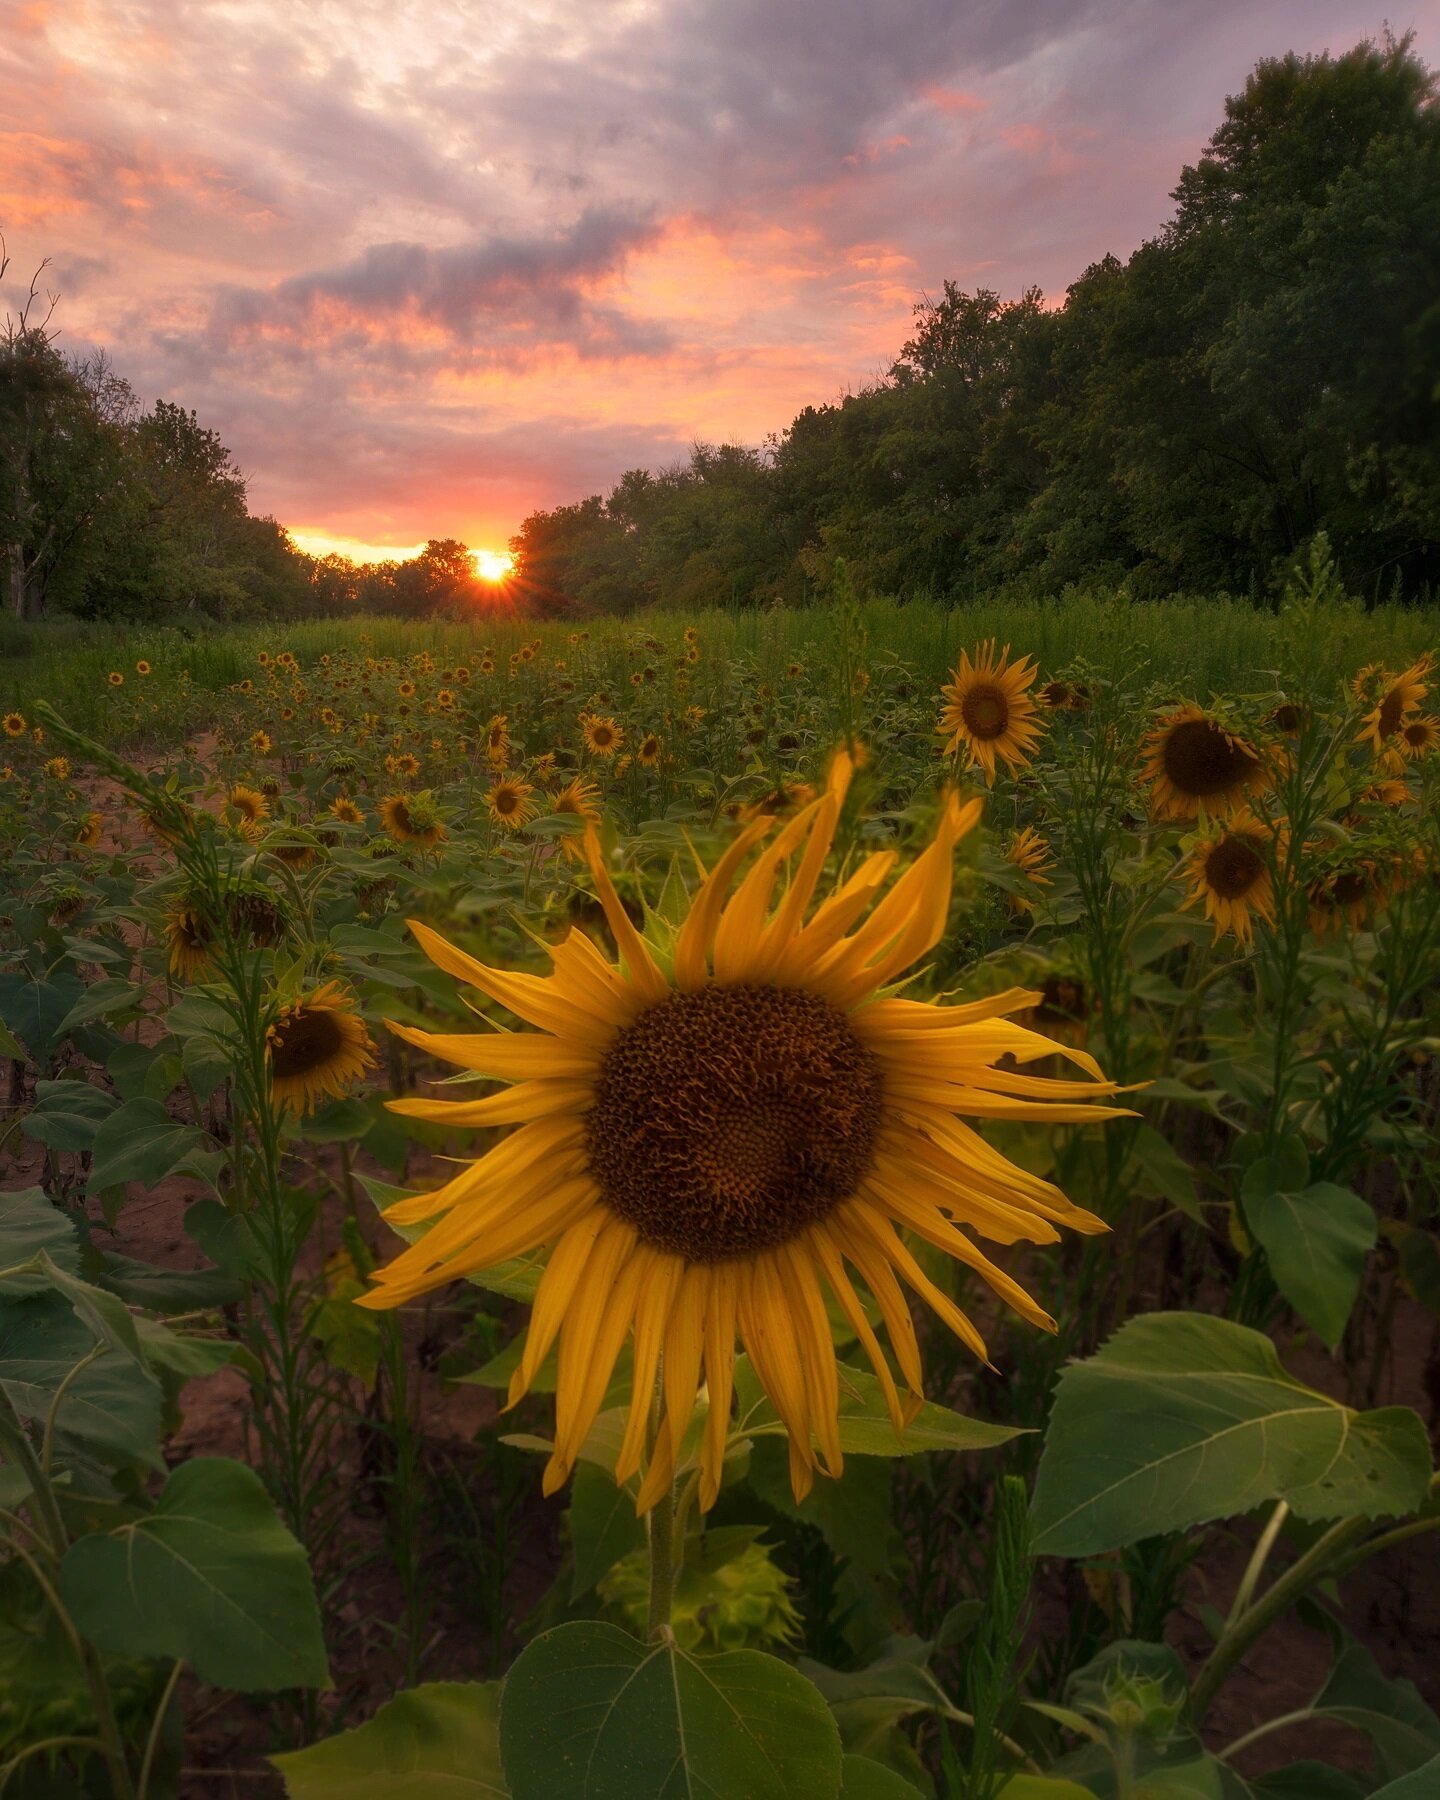 &quot;Sunstars&quot;
.
Got so lucky my first time visiting these sunflower fields. I thought I might have gone too late in the summer for there to be any flowers left standing but there were plenty. In addition, it had been overcast all day and I was